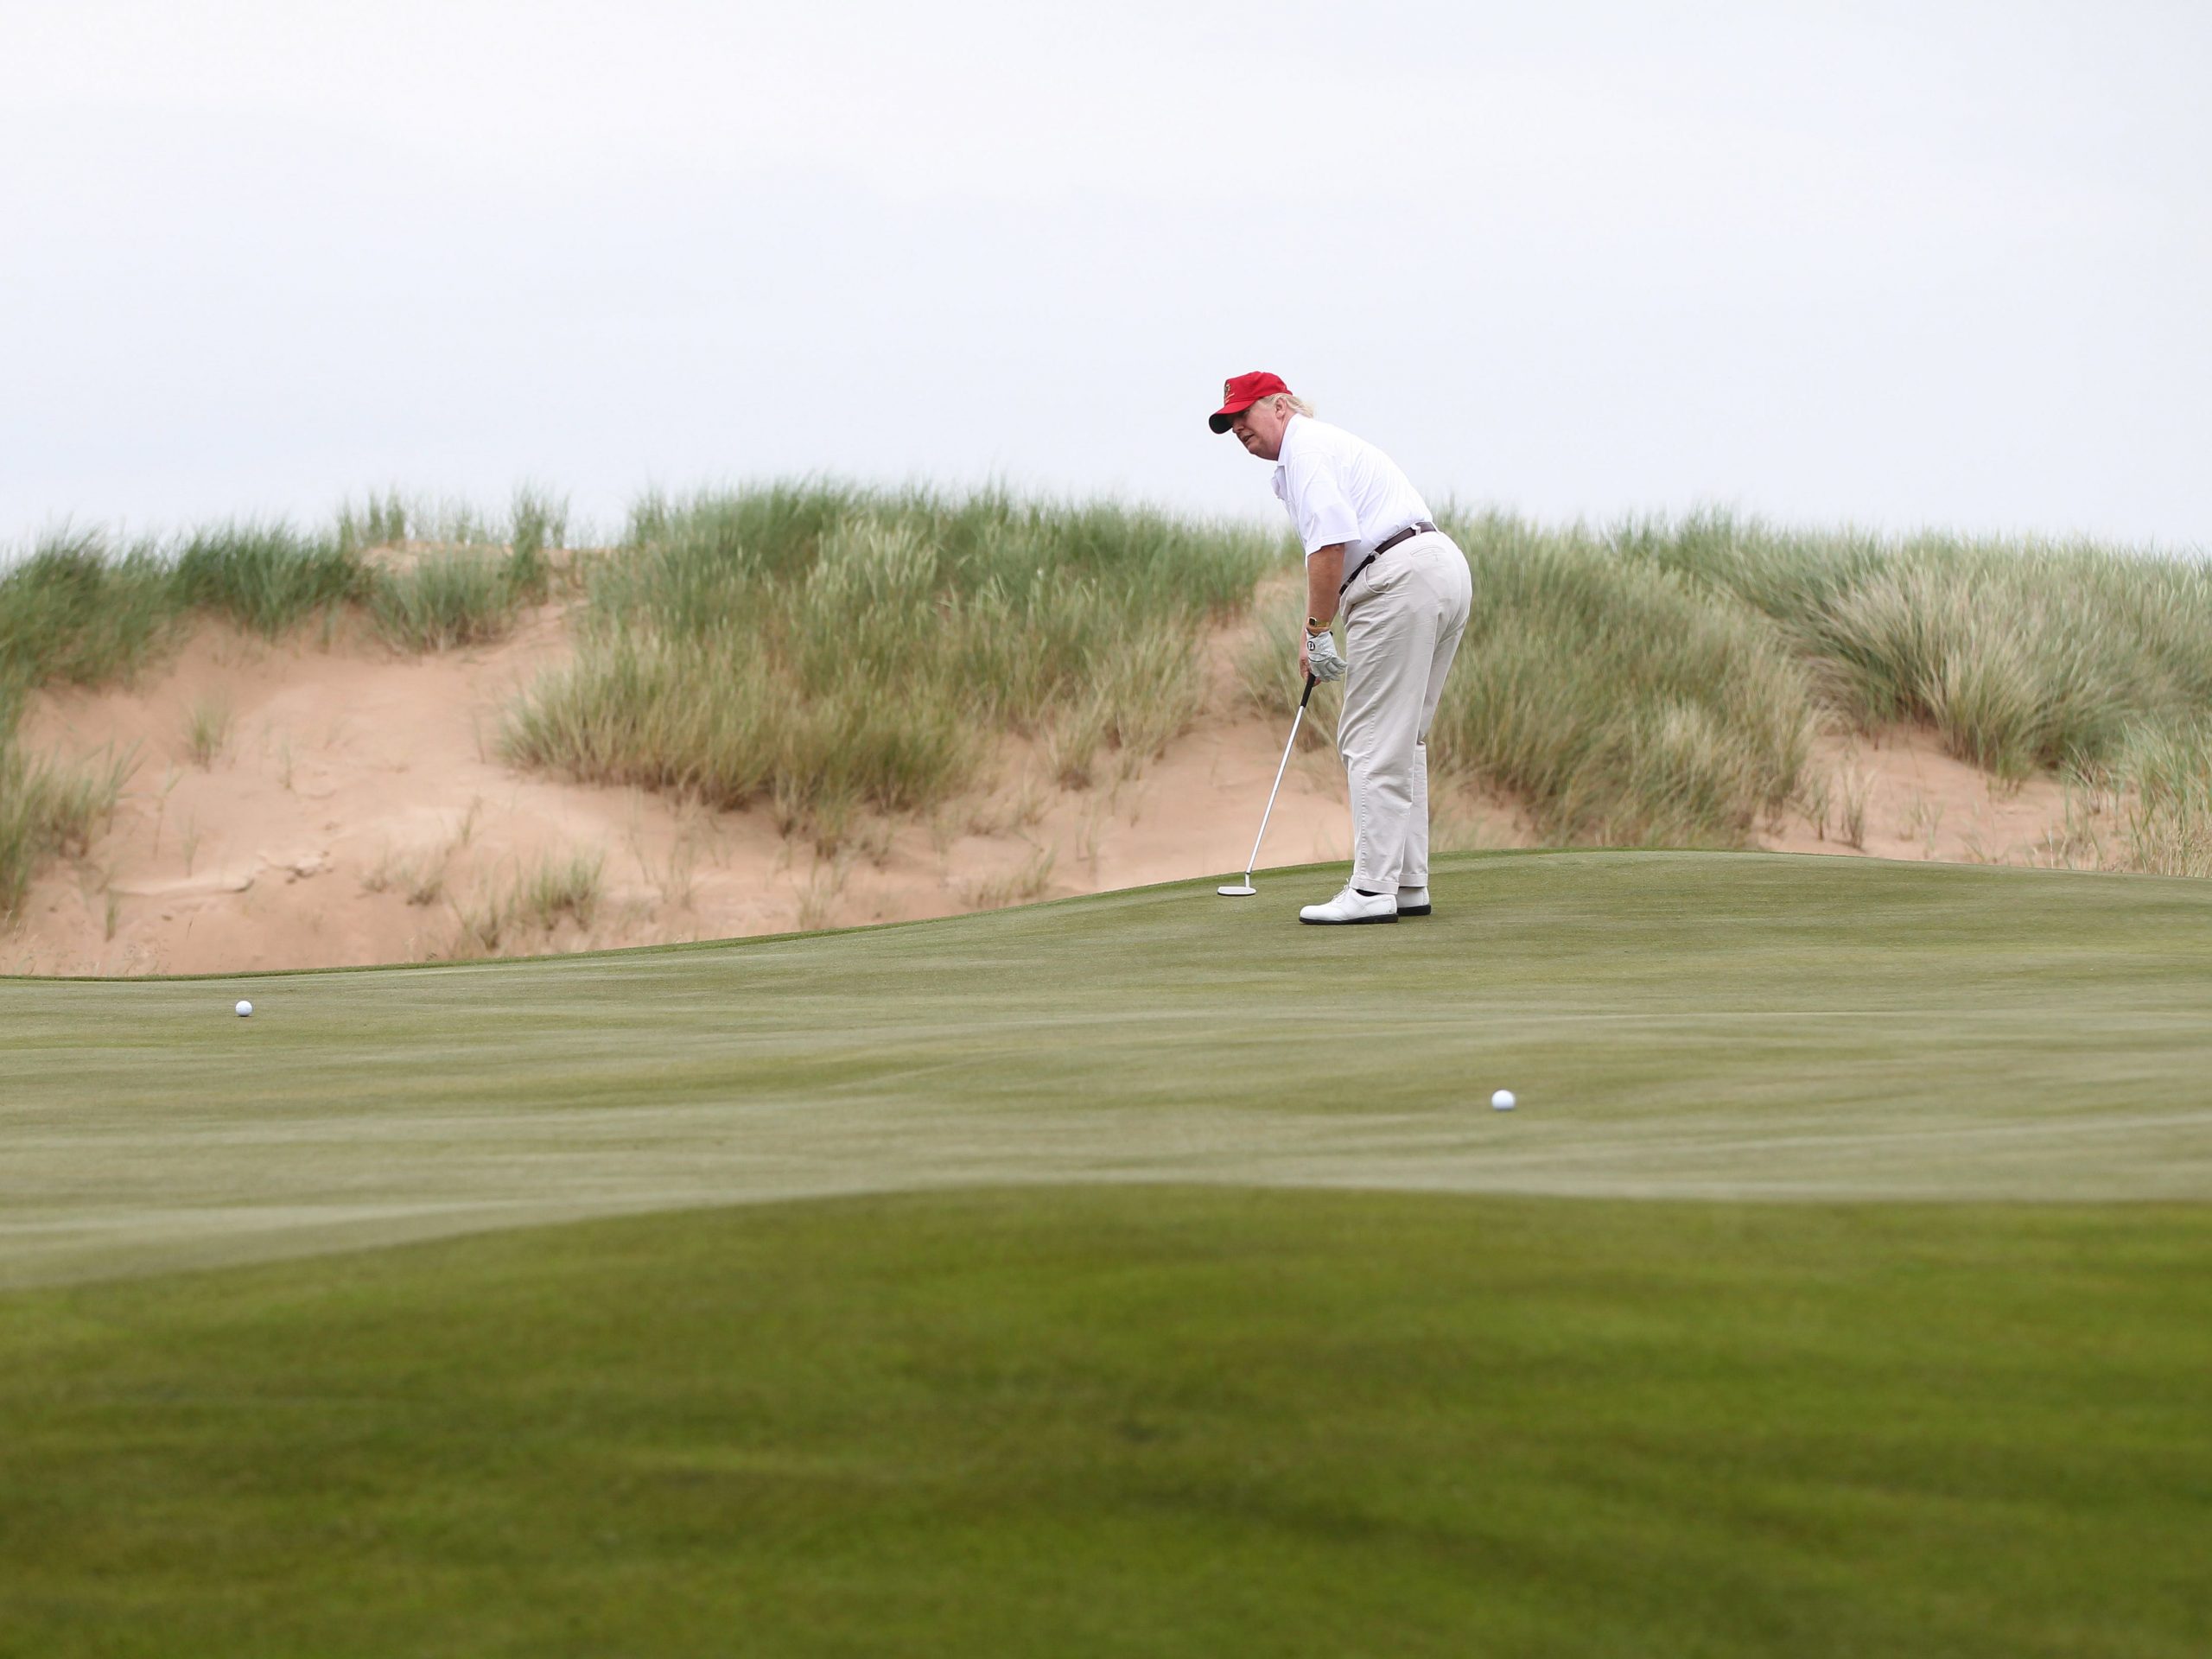 Donald Trump plays a round of golf after the opening of The Trump International Golf Links Course on July 10, 2012 in Balmedie, Scotland.